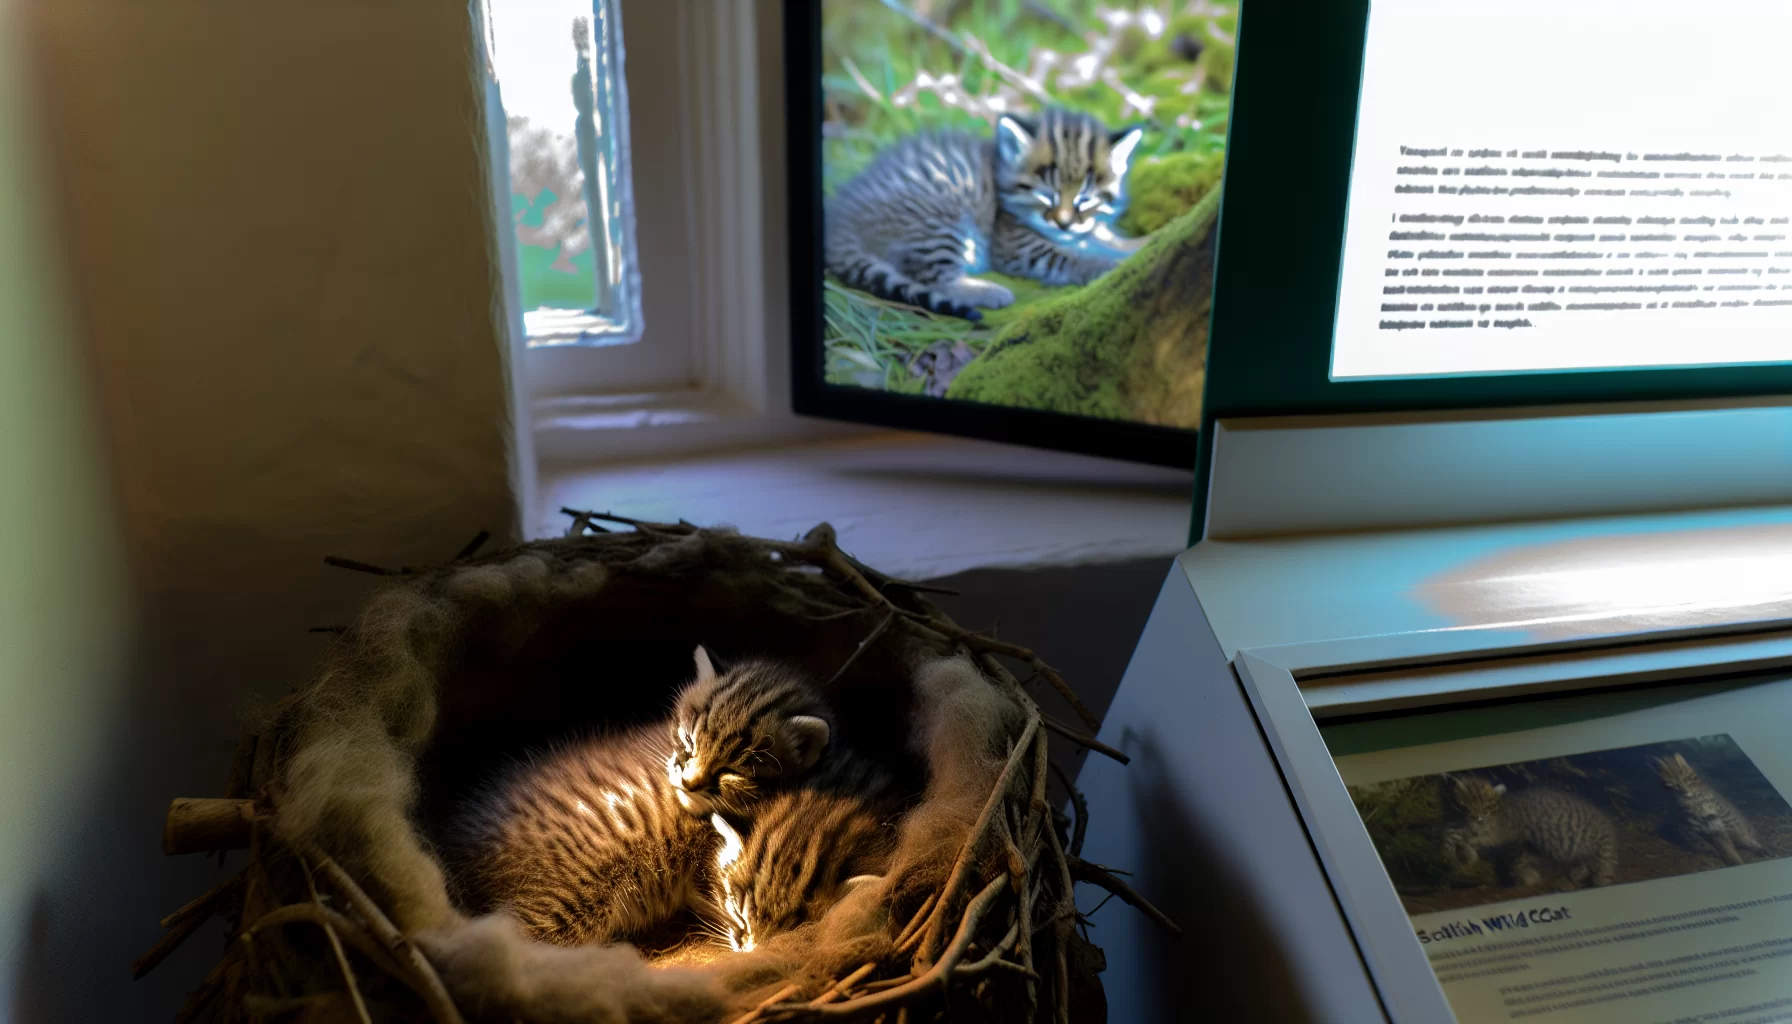 Rare scottish wildcat kittens born in Wales ignite hope for biodiversity conservation